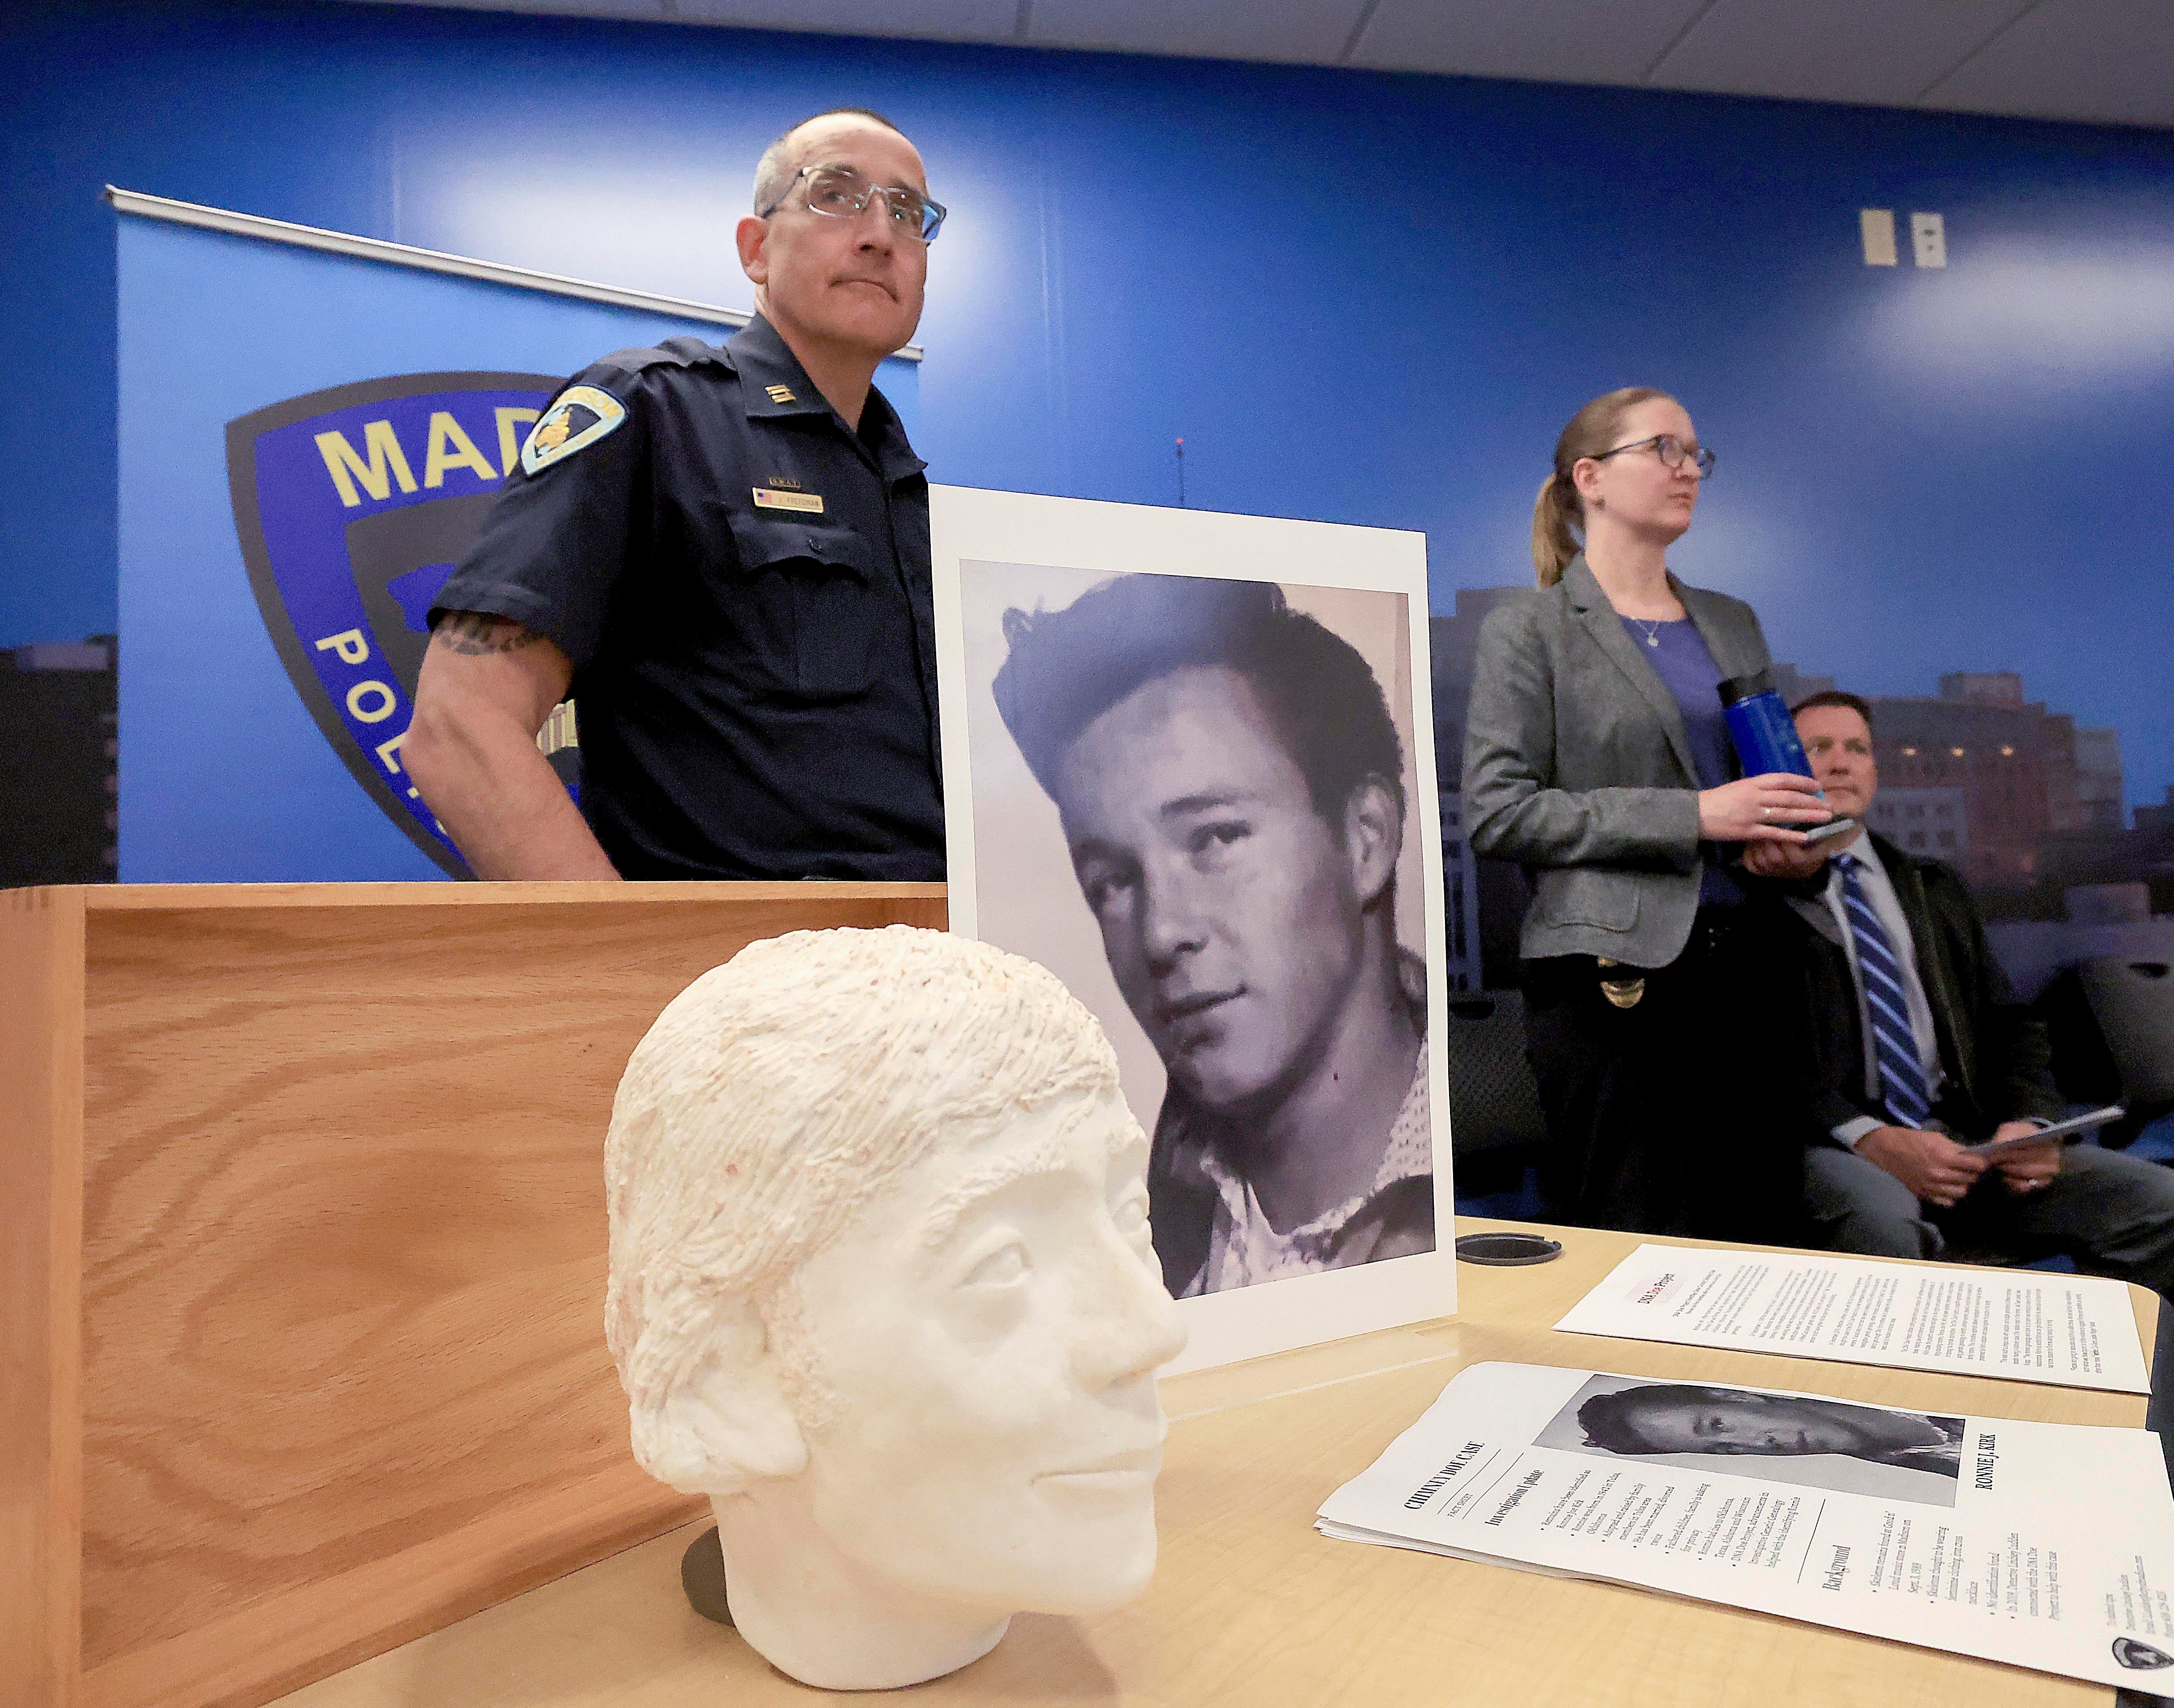 Madison Police Department Mid Town District Capt. Jason Freedman and Det. Lindsey Ludden announce the identification of Ronnie Joe Kirk of Tulsa, Okla. as the person whose remains were discovered in a chimney of a former music store in the city In 1989.